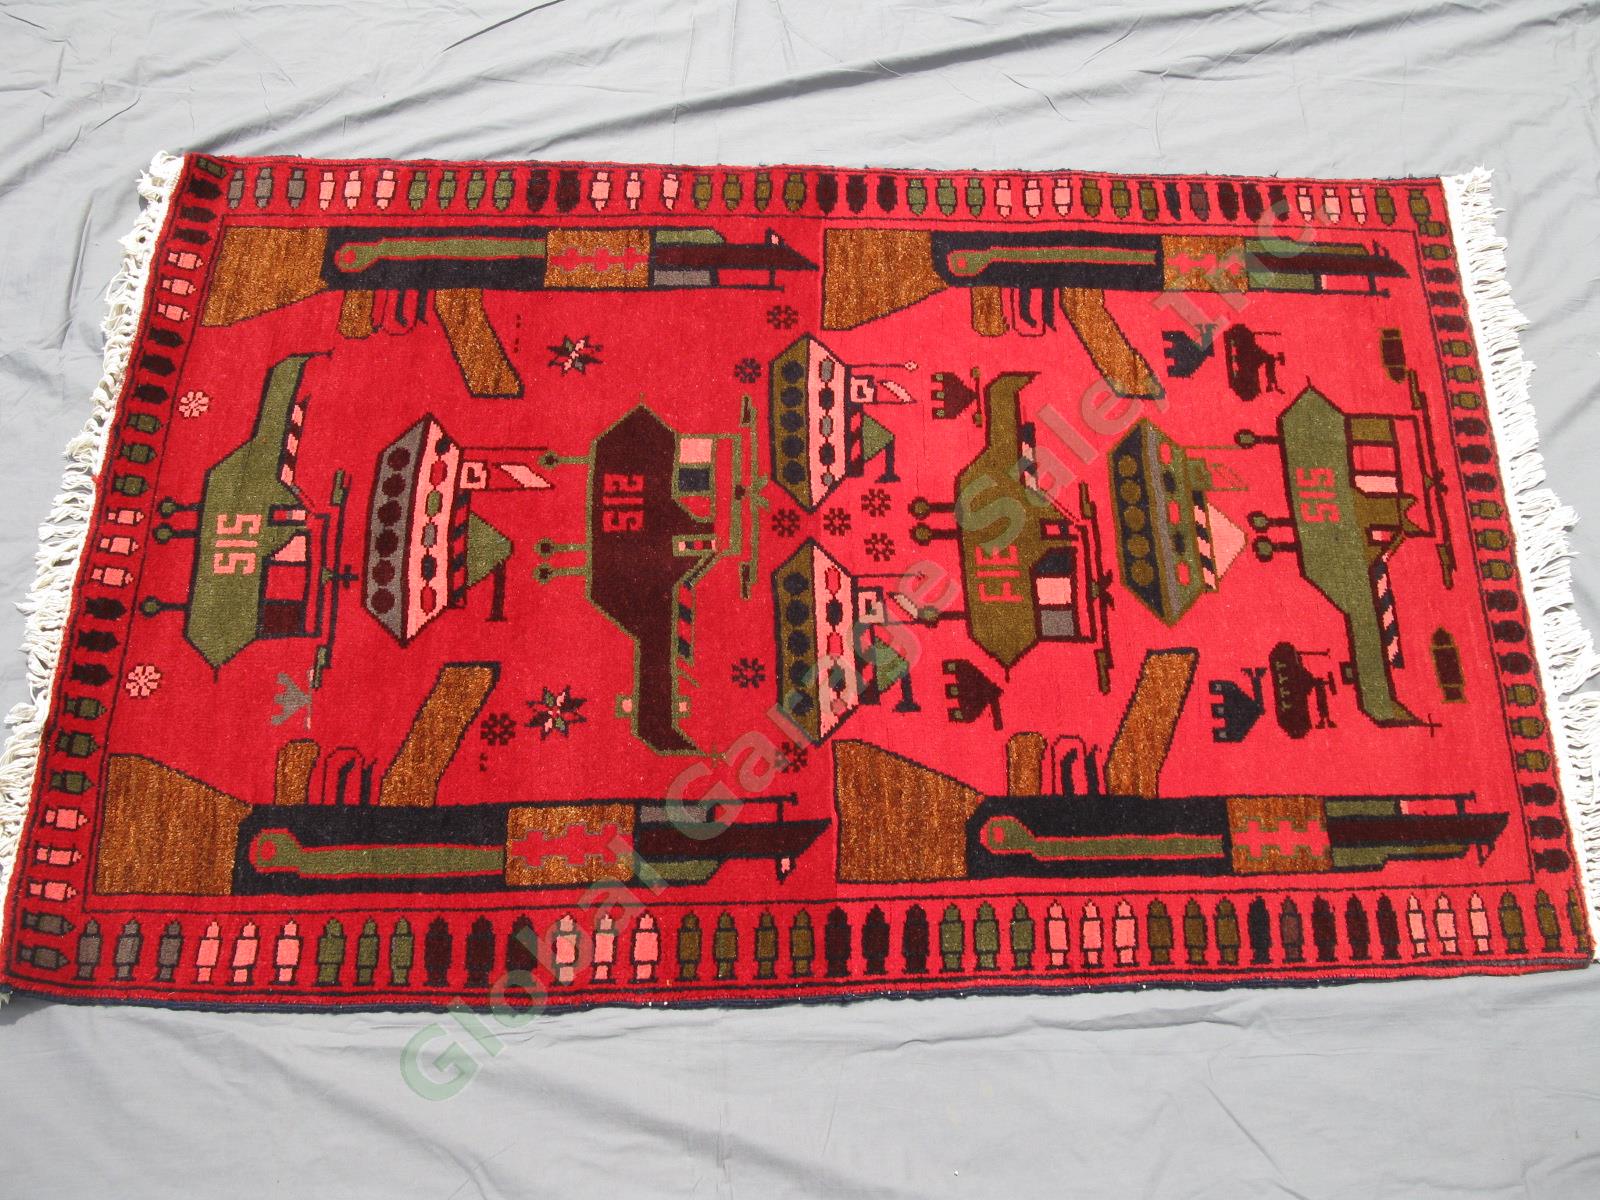 Authentic Afghan Tribal War Rug Circa 2007 Tanks Helicopters AK-47 38.5"x60" NR